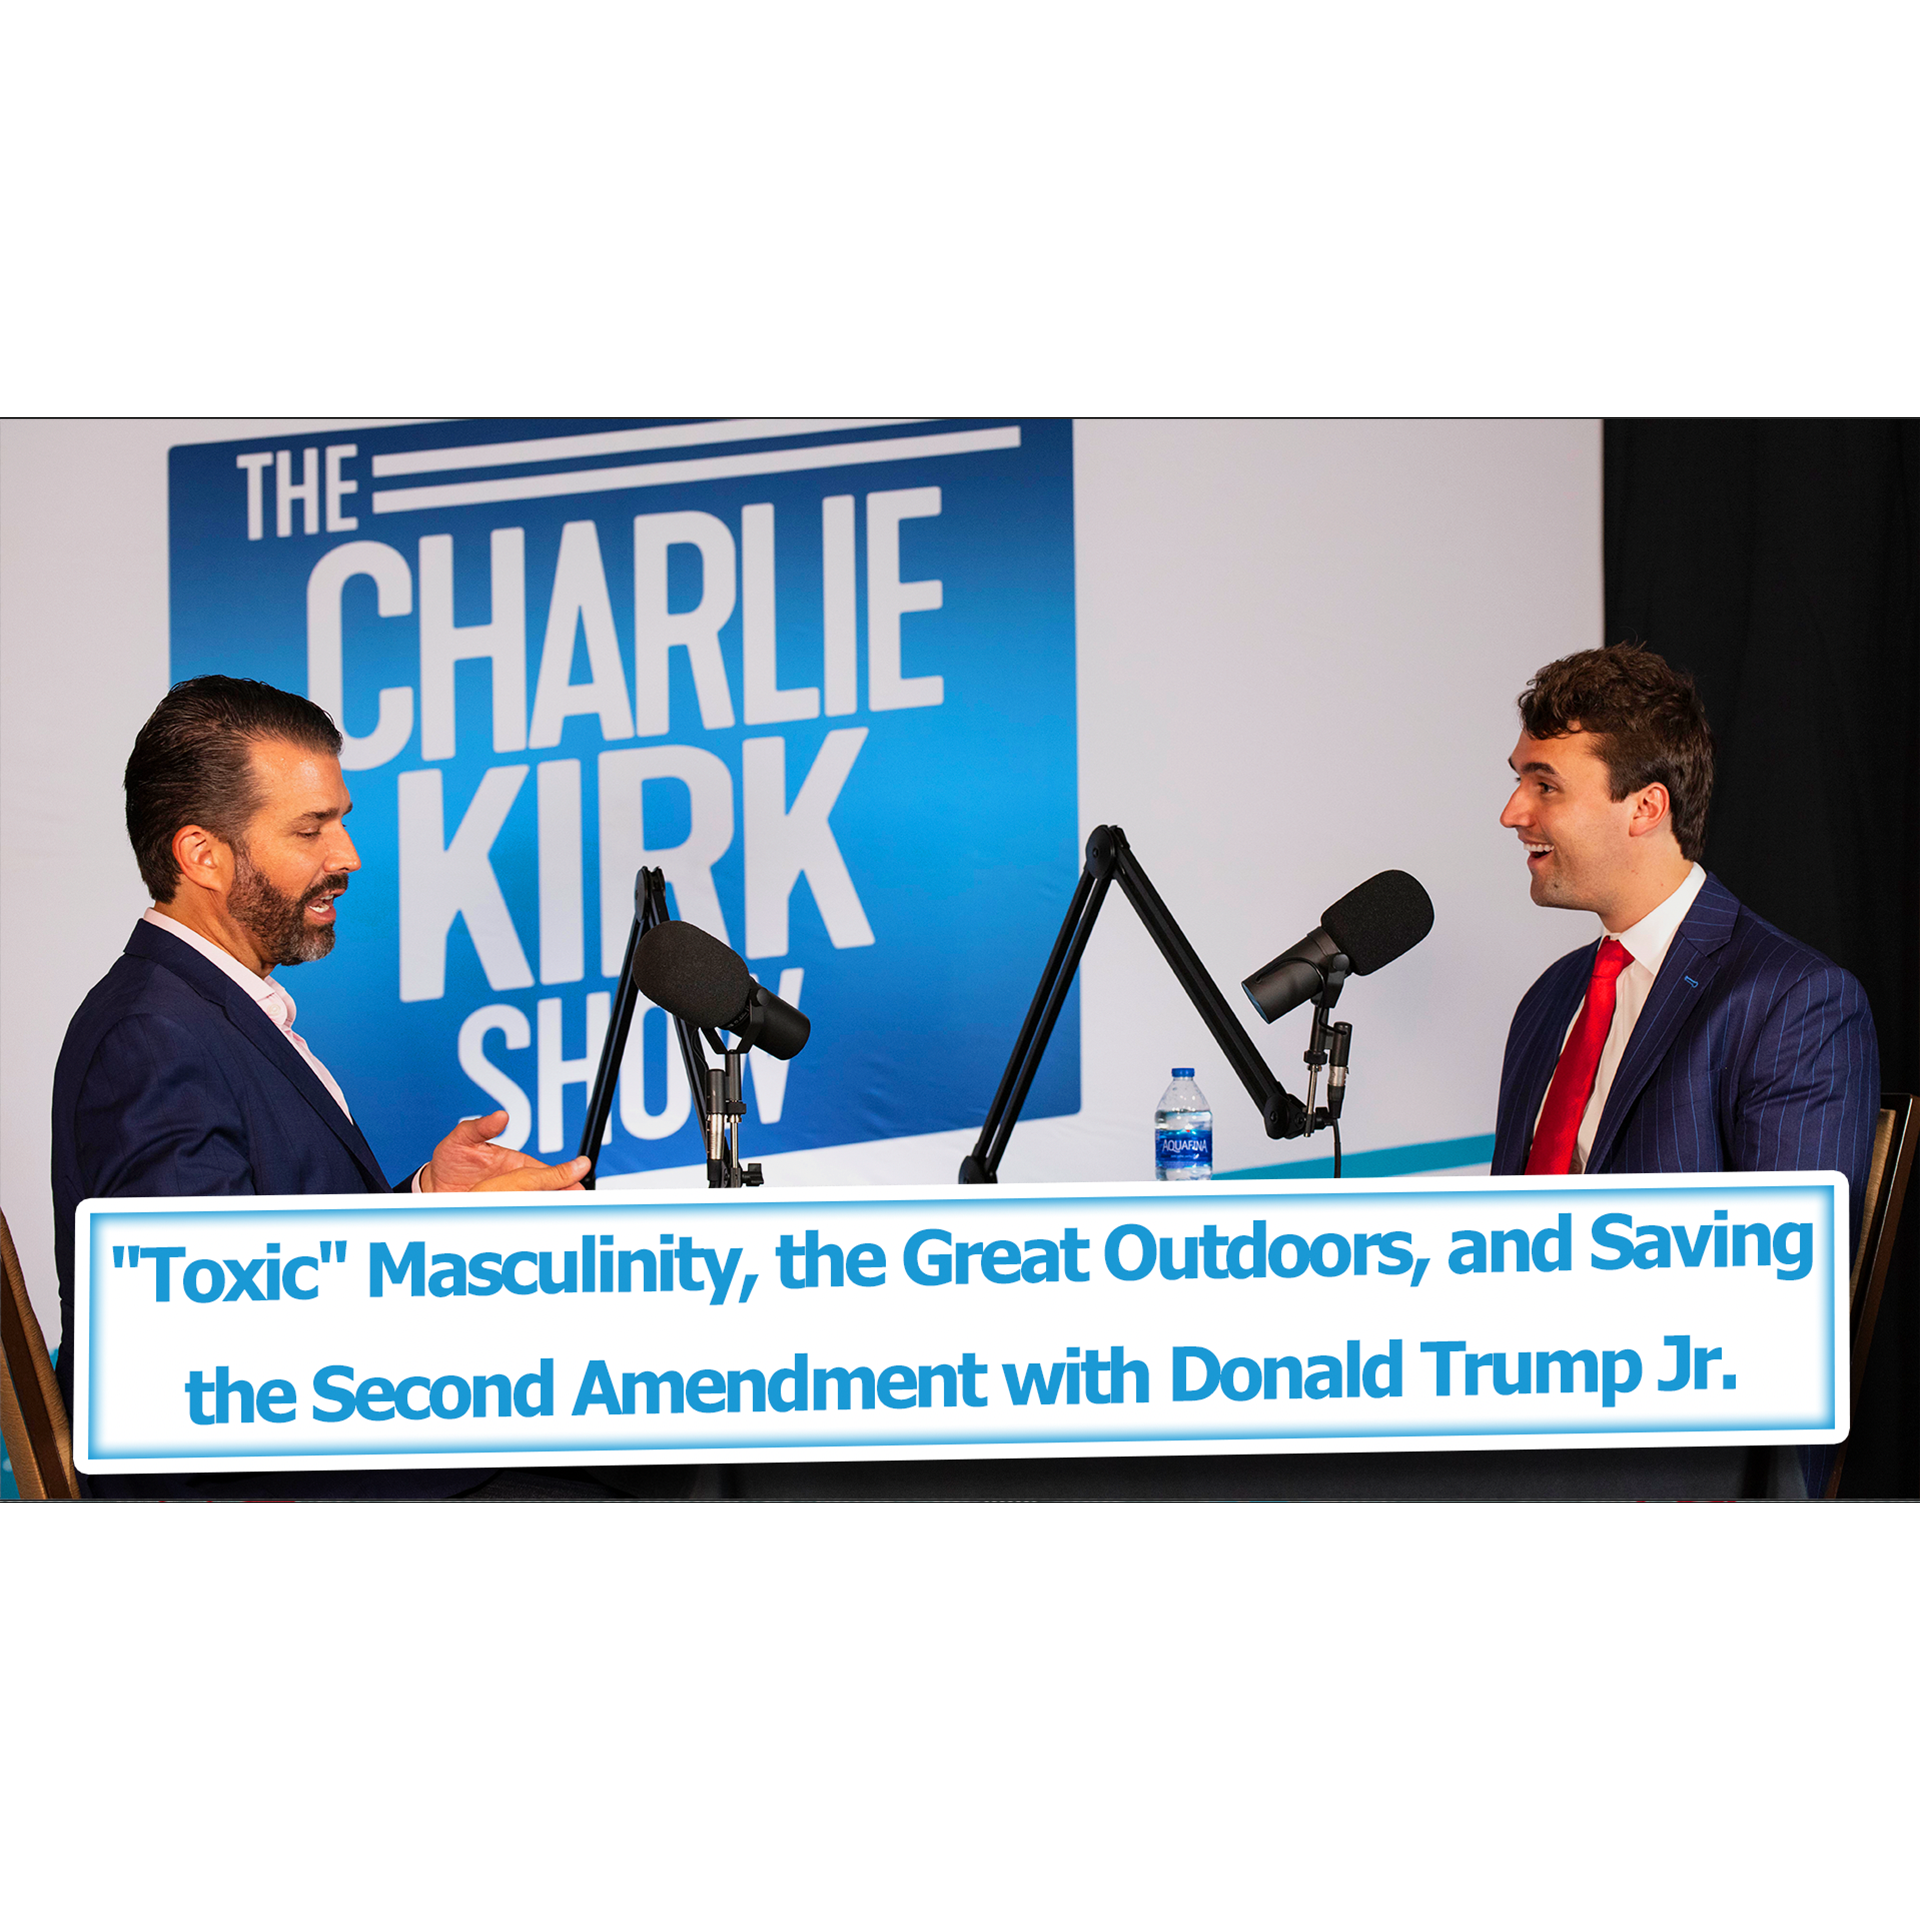 "Toxic" Masculinity, the Great Outdoors, and Saving the Second Amendment with Donald Trump Jr.